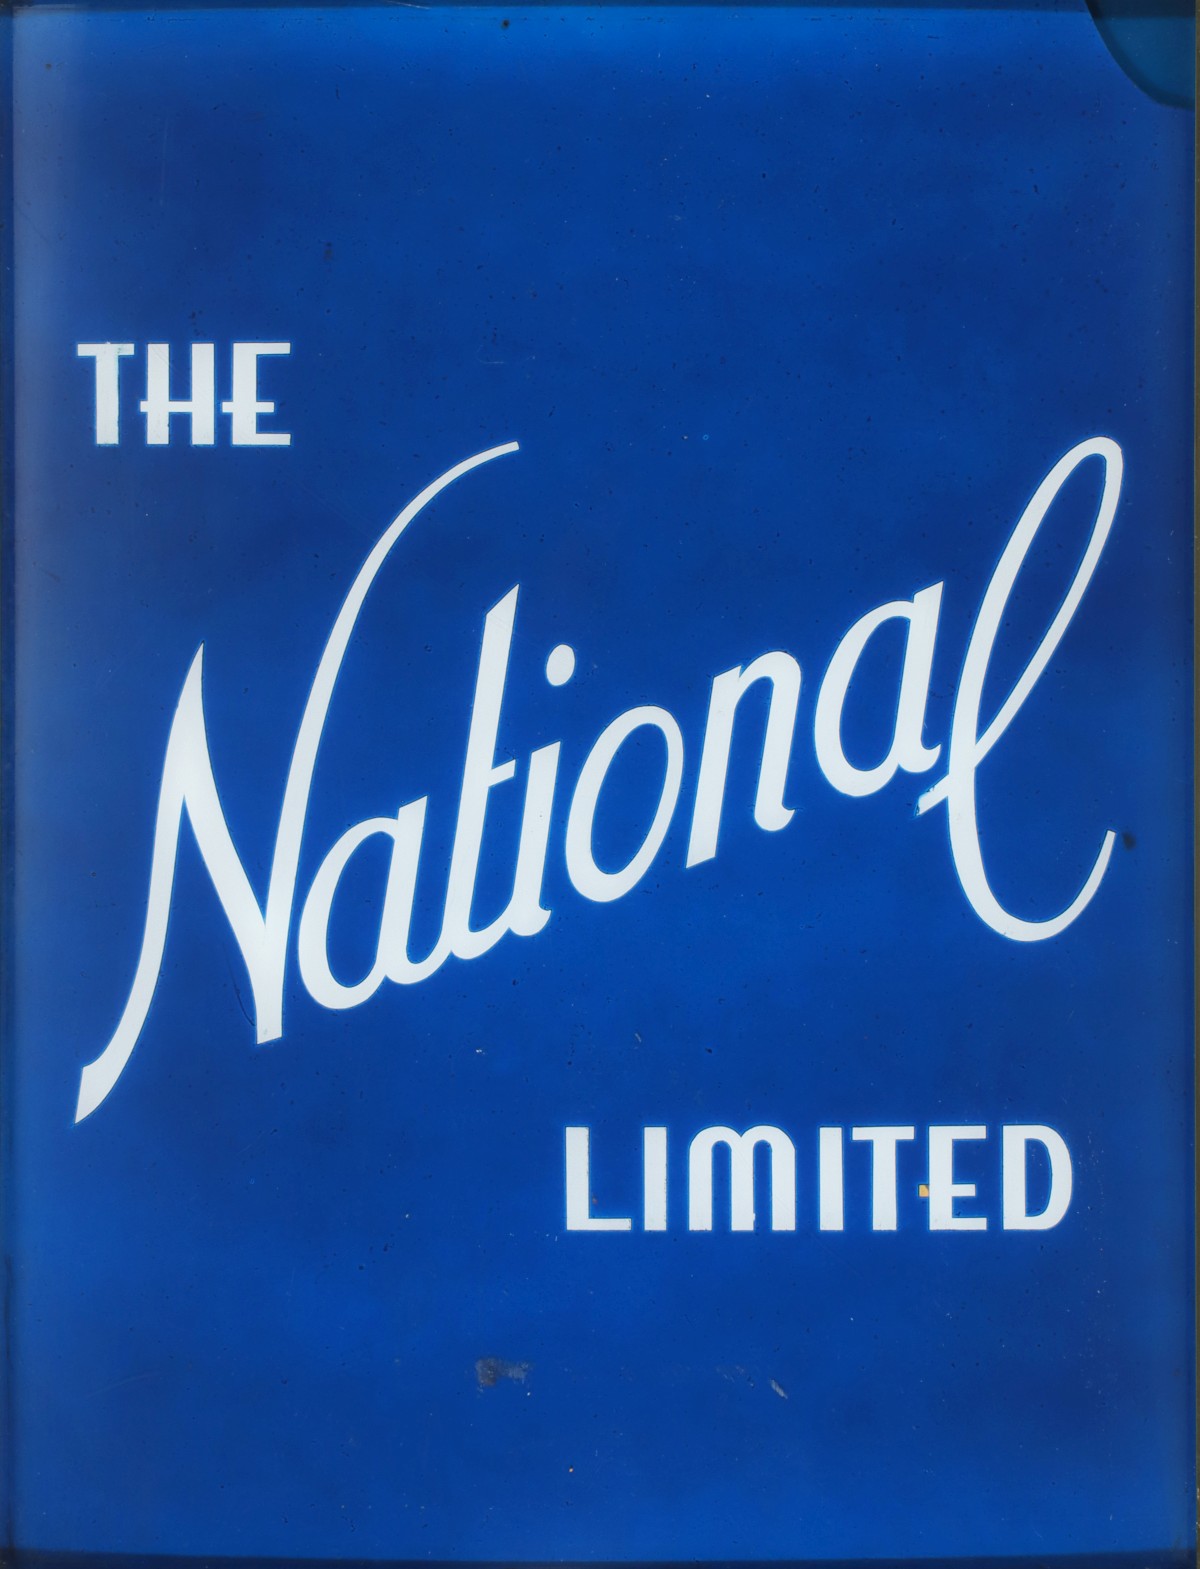 A B&O RAILROAD DRUMHEAD LENS FOR THE NATIONAL LIMITED